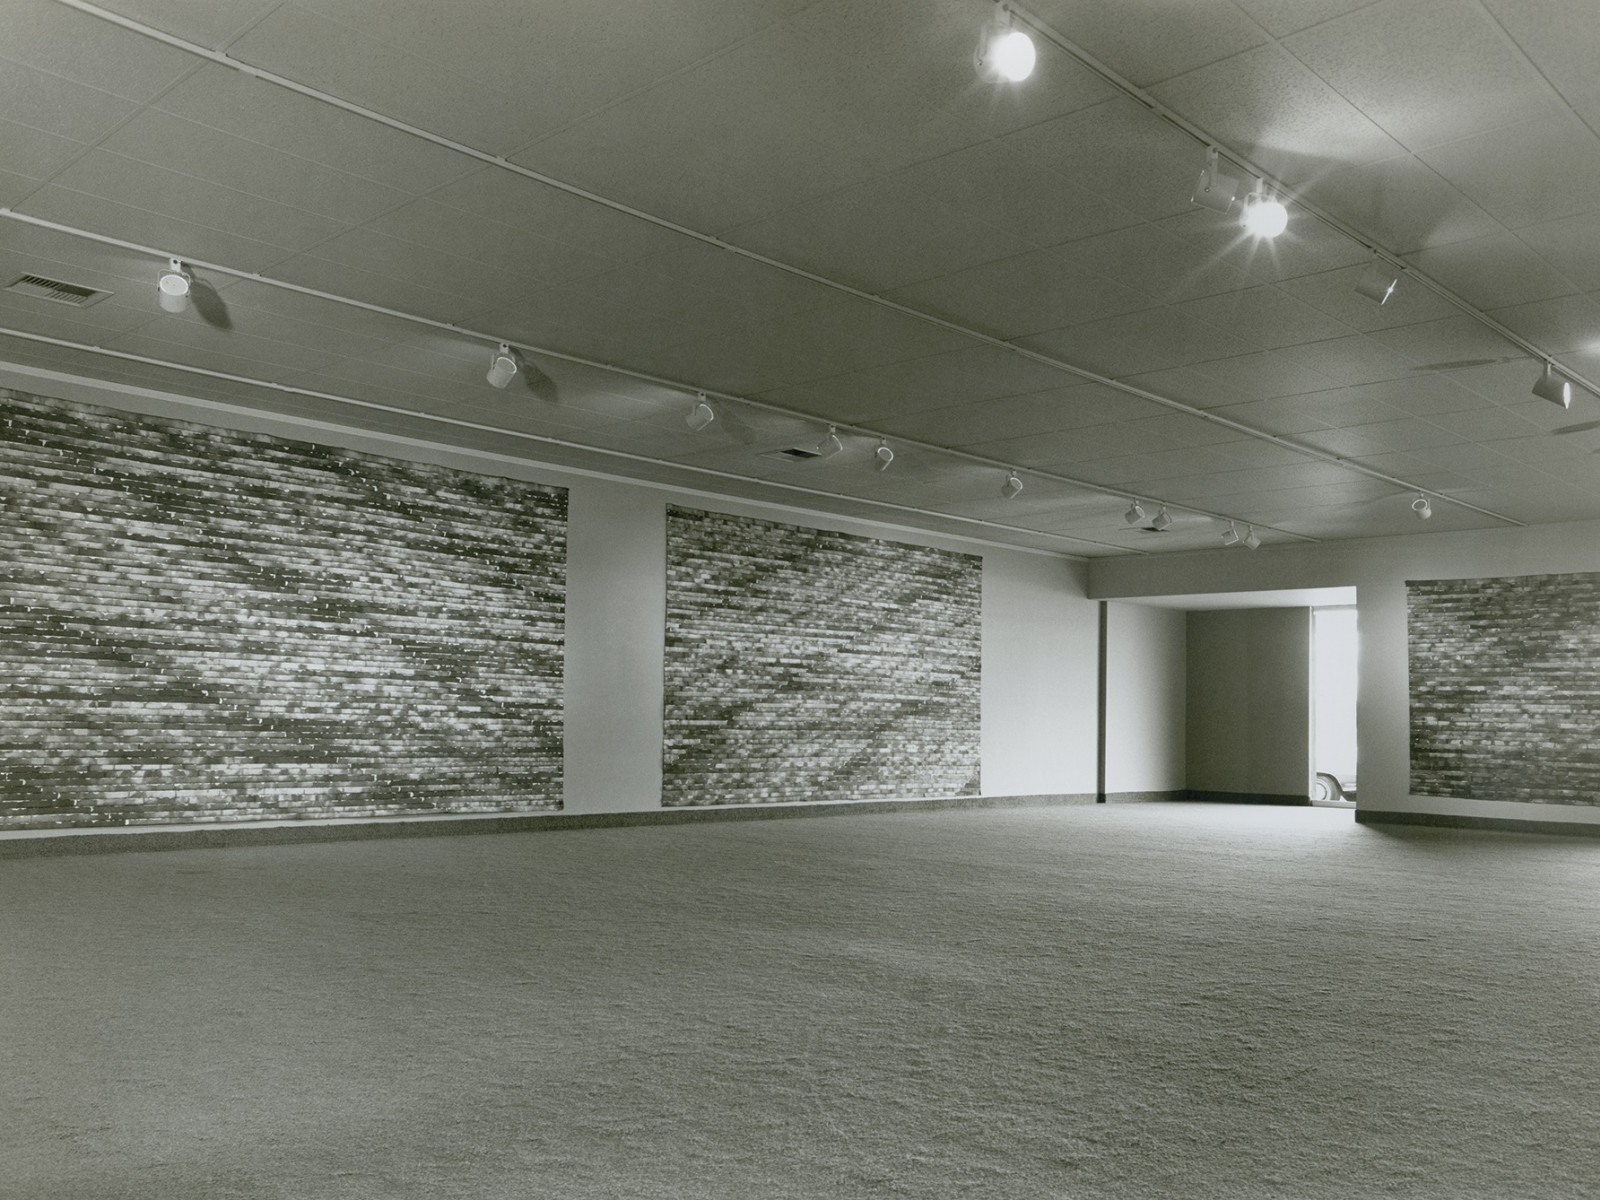 &quot;Allan McCollum's Unstretched Canvases&quot; by Meredith Malone